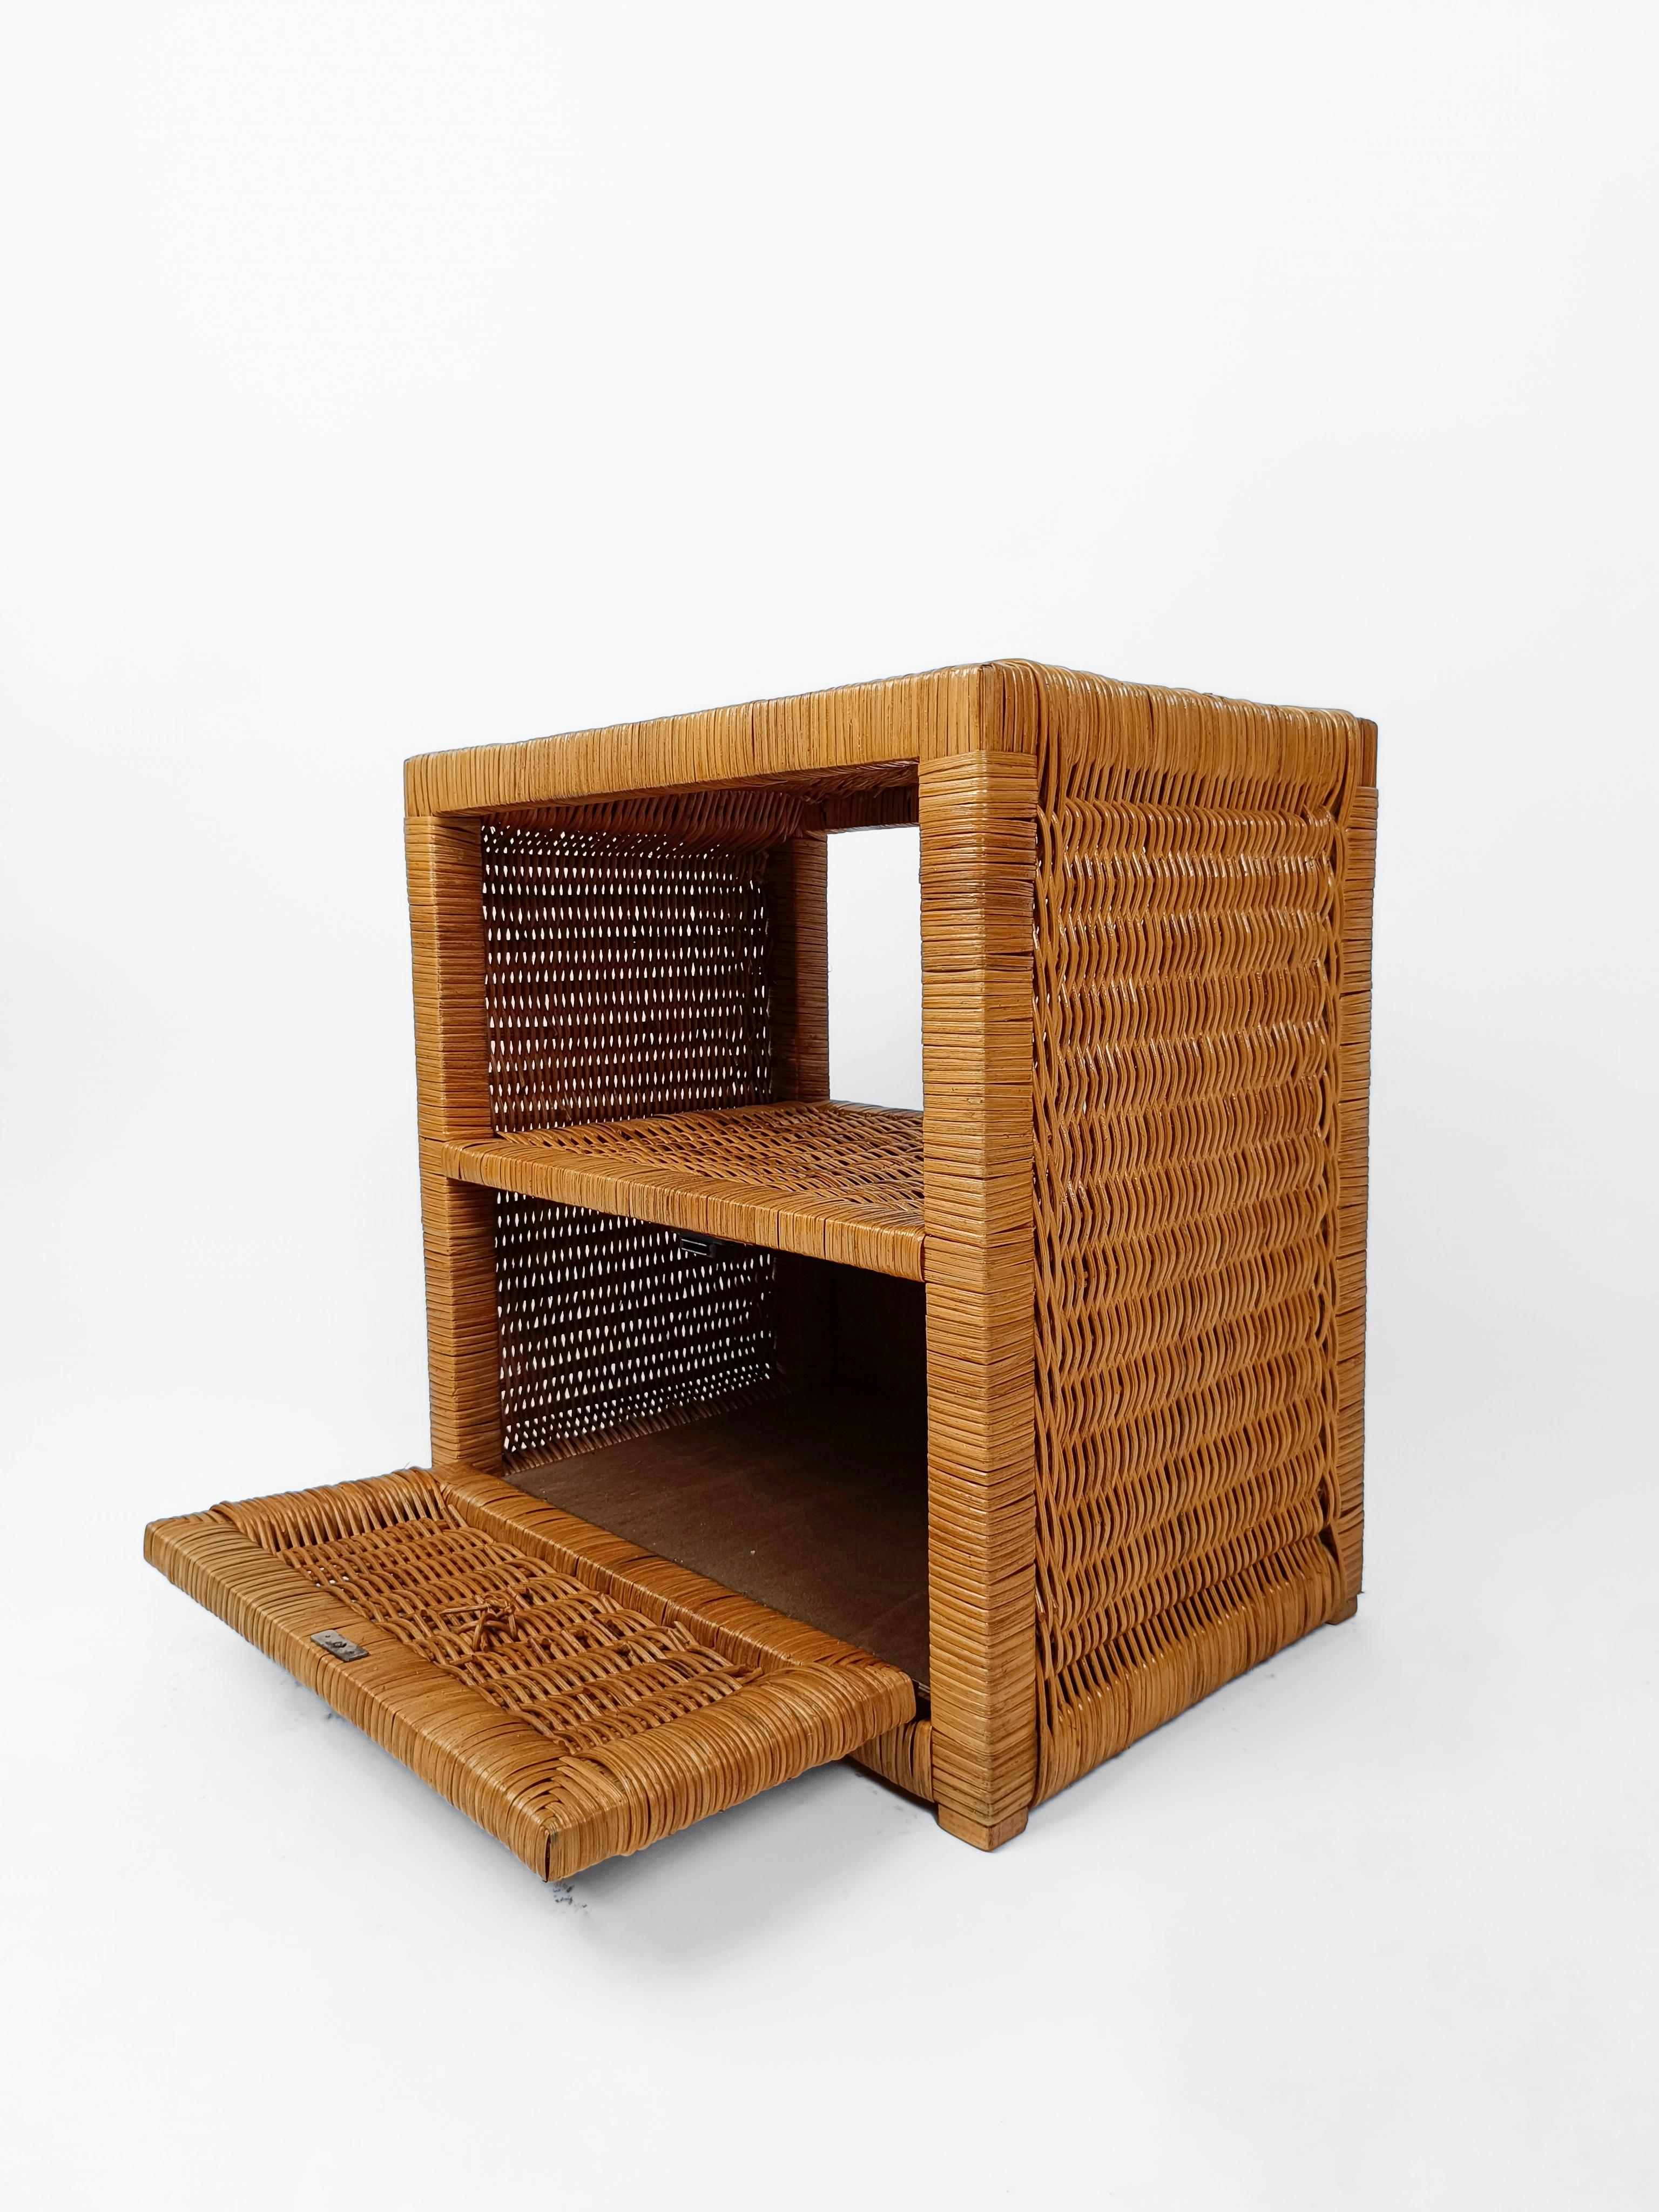 Late 20th Century Pair of Woven Rattan and Wicker Nightstands / Bedside Tables, Italy 1970s